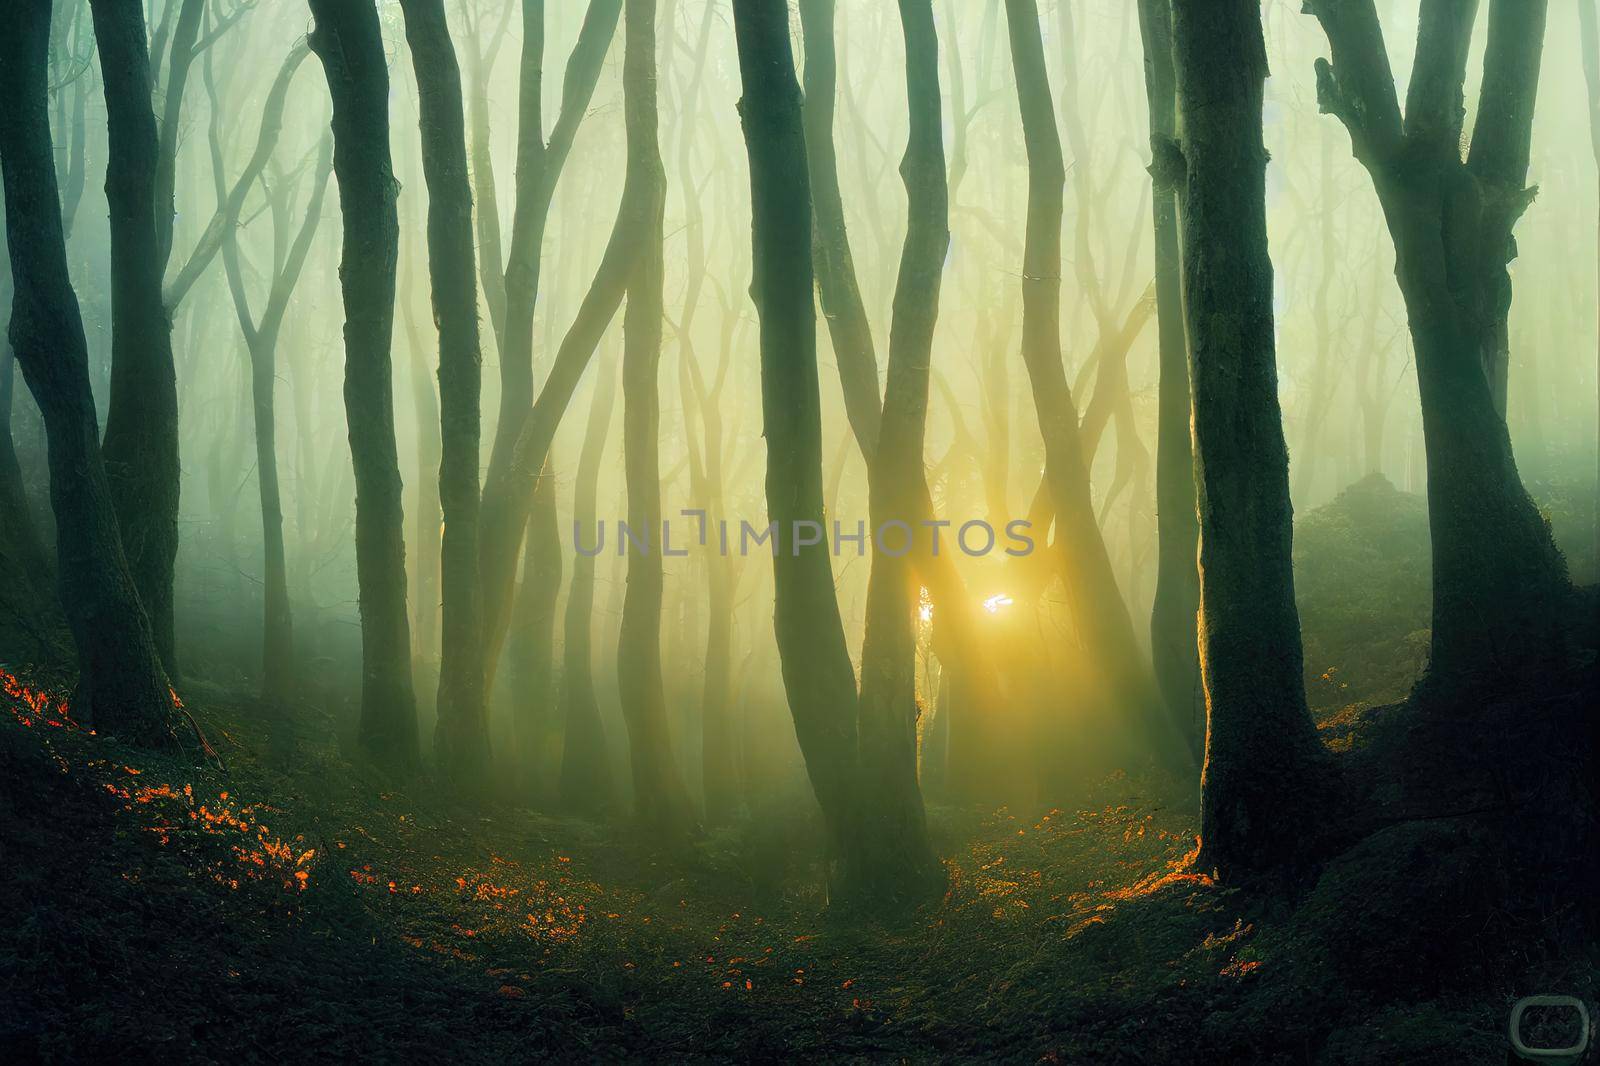 Sunlight shining through the fog in the woods, Mt Eden summit walking track, Auckland.. High quality illustration